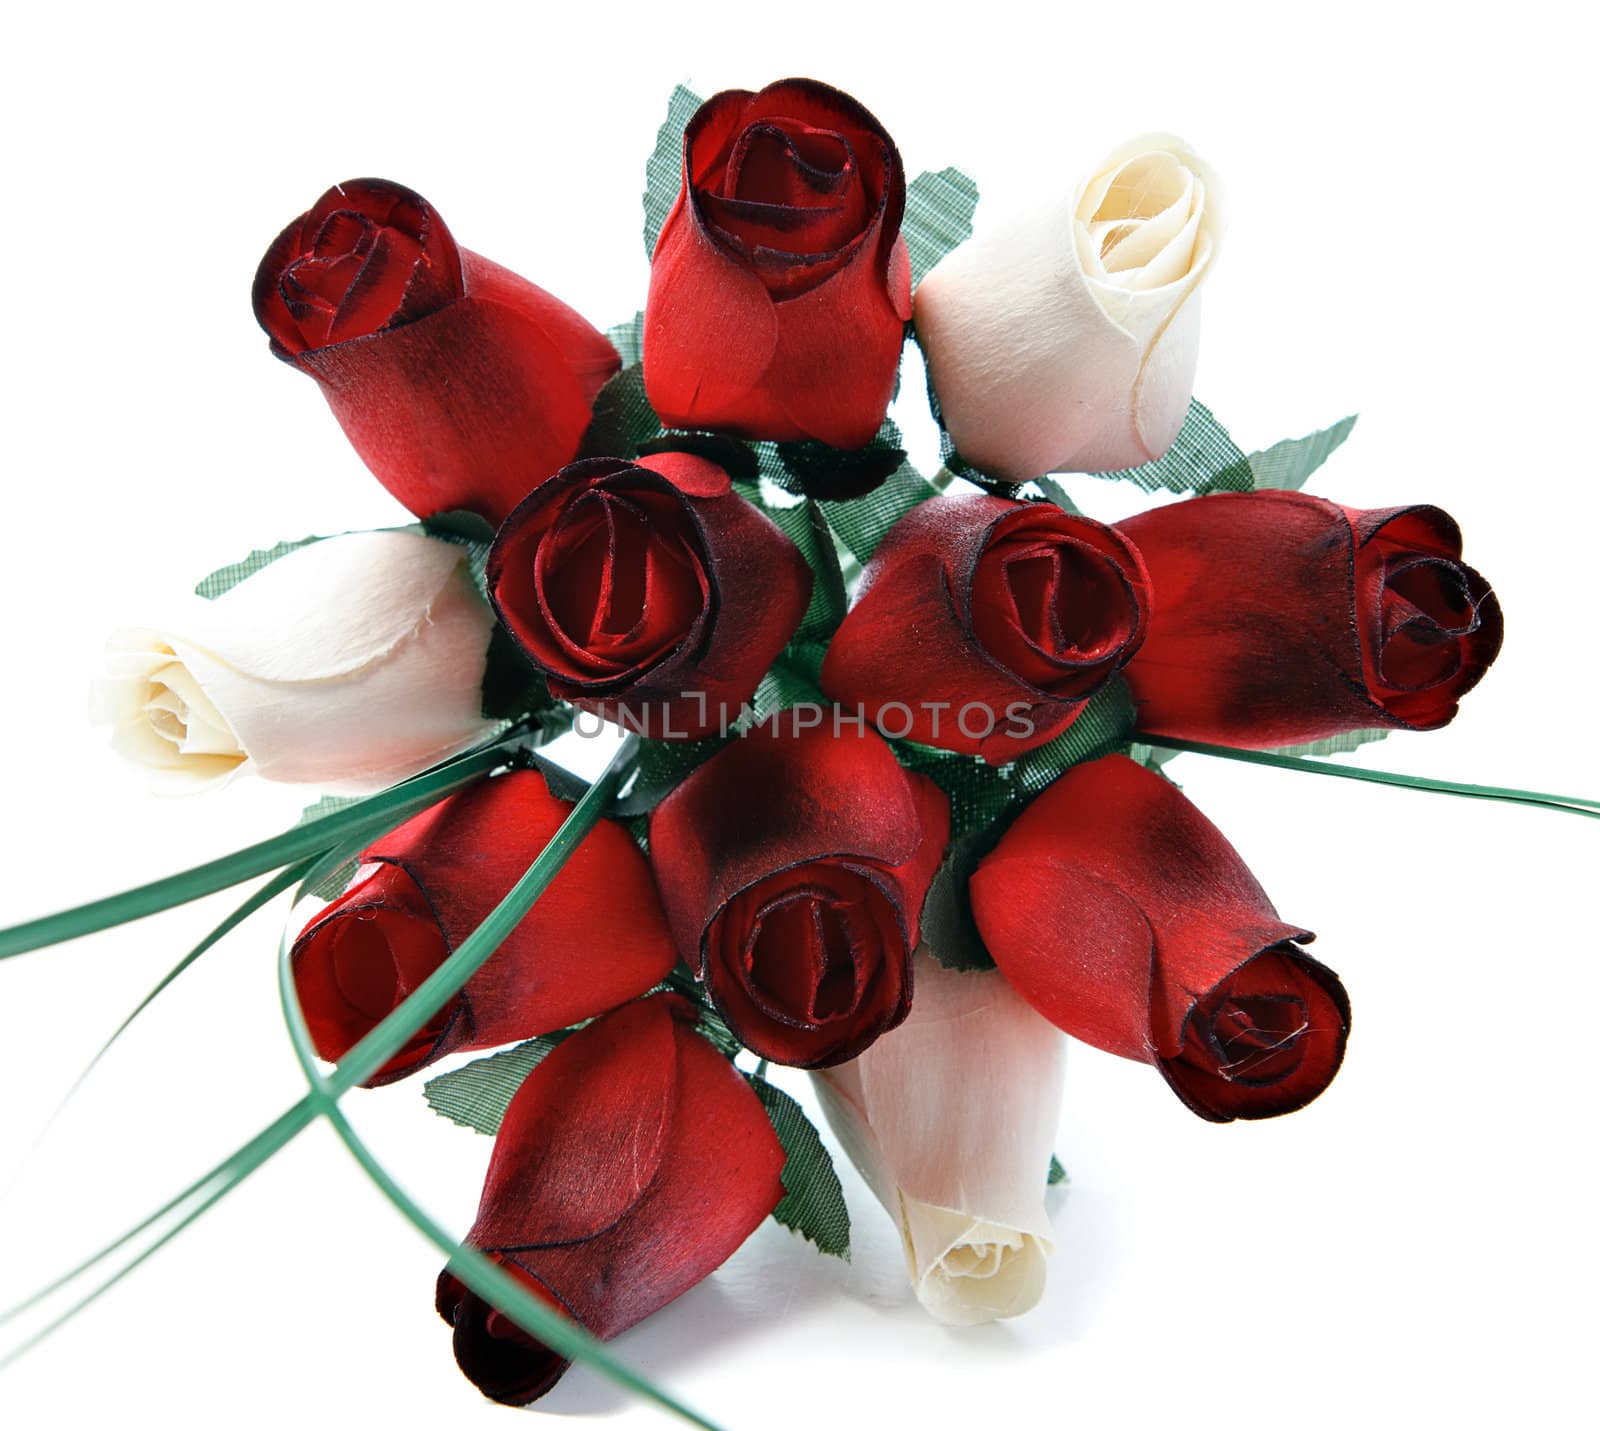 A bouquet of a dozen roses that are made of wood, isolated on a white background.